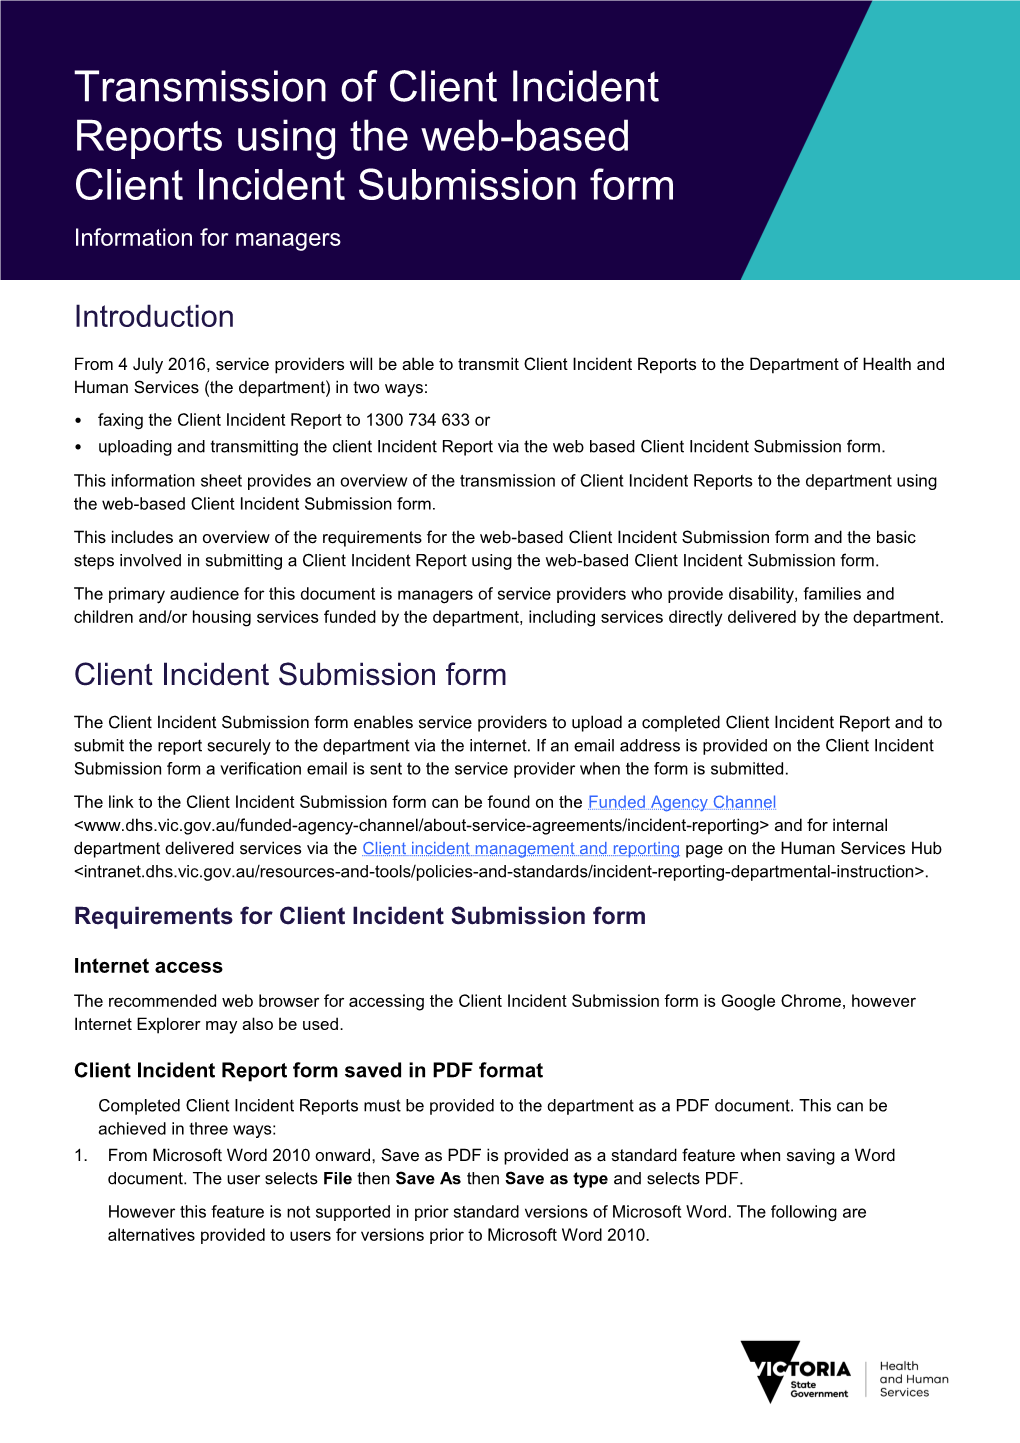 Transmission of Client Incident Reports Using the Web Based Client Incident Submission